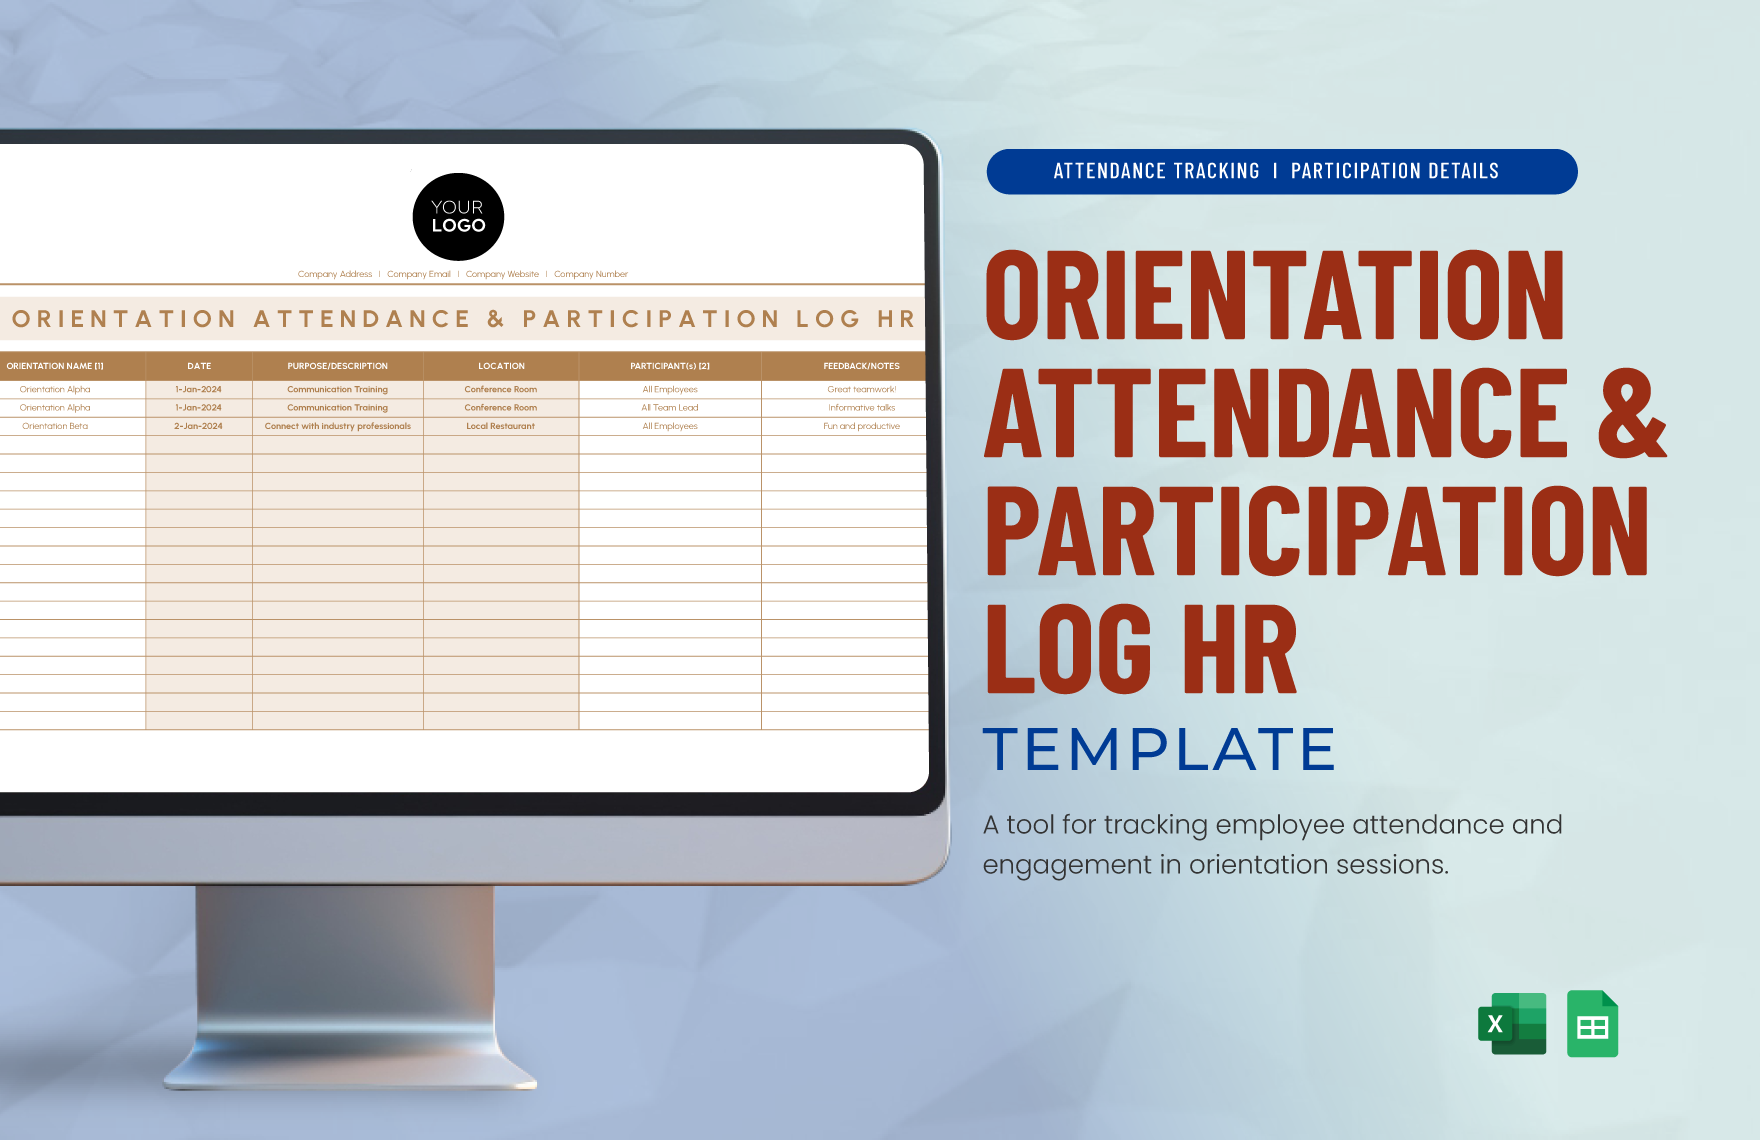 Free Orientation Attendance & Participation Log HR Template in Excel, Google Sheets